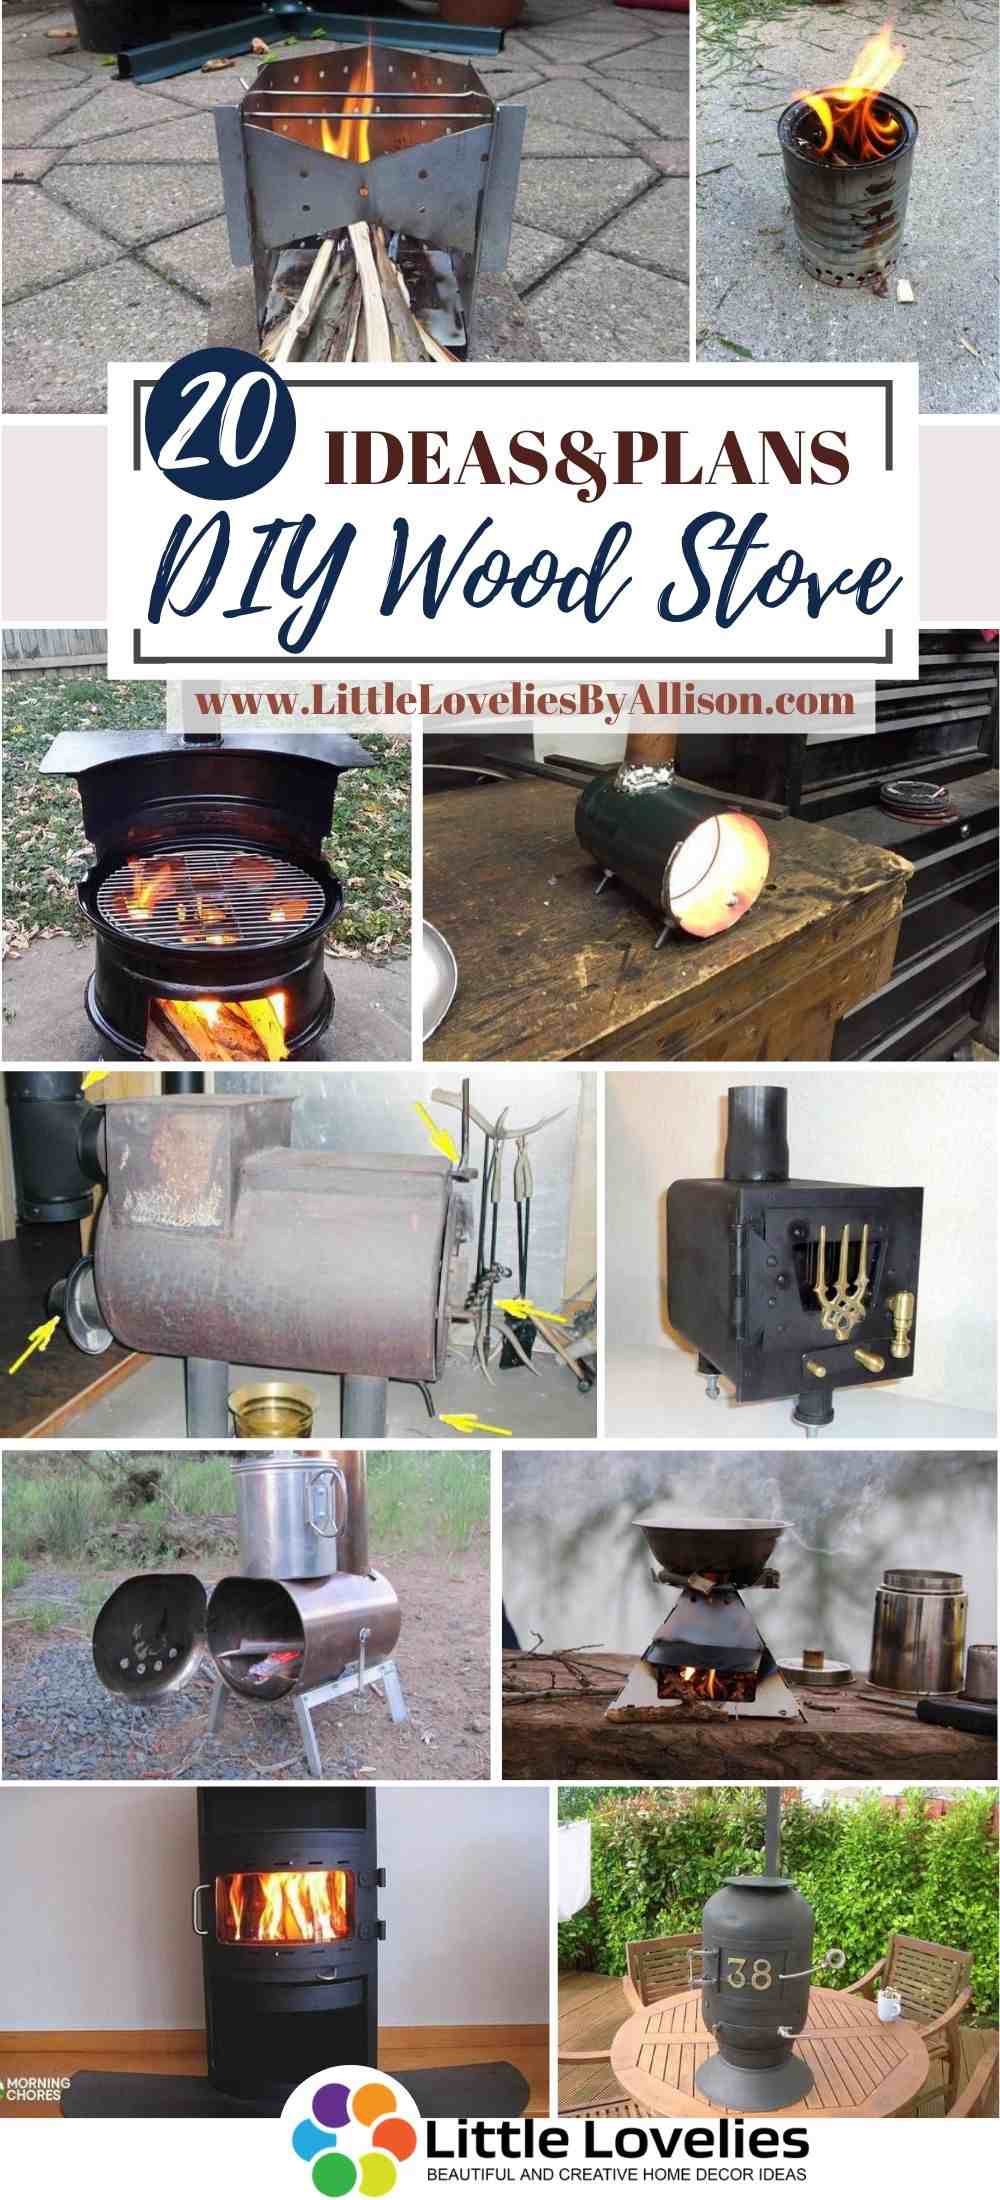 20 Diy Wood Stove Projects How To